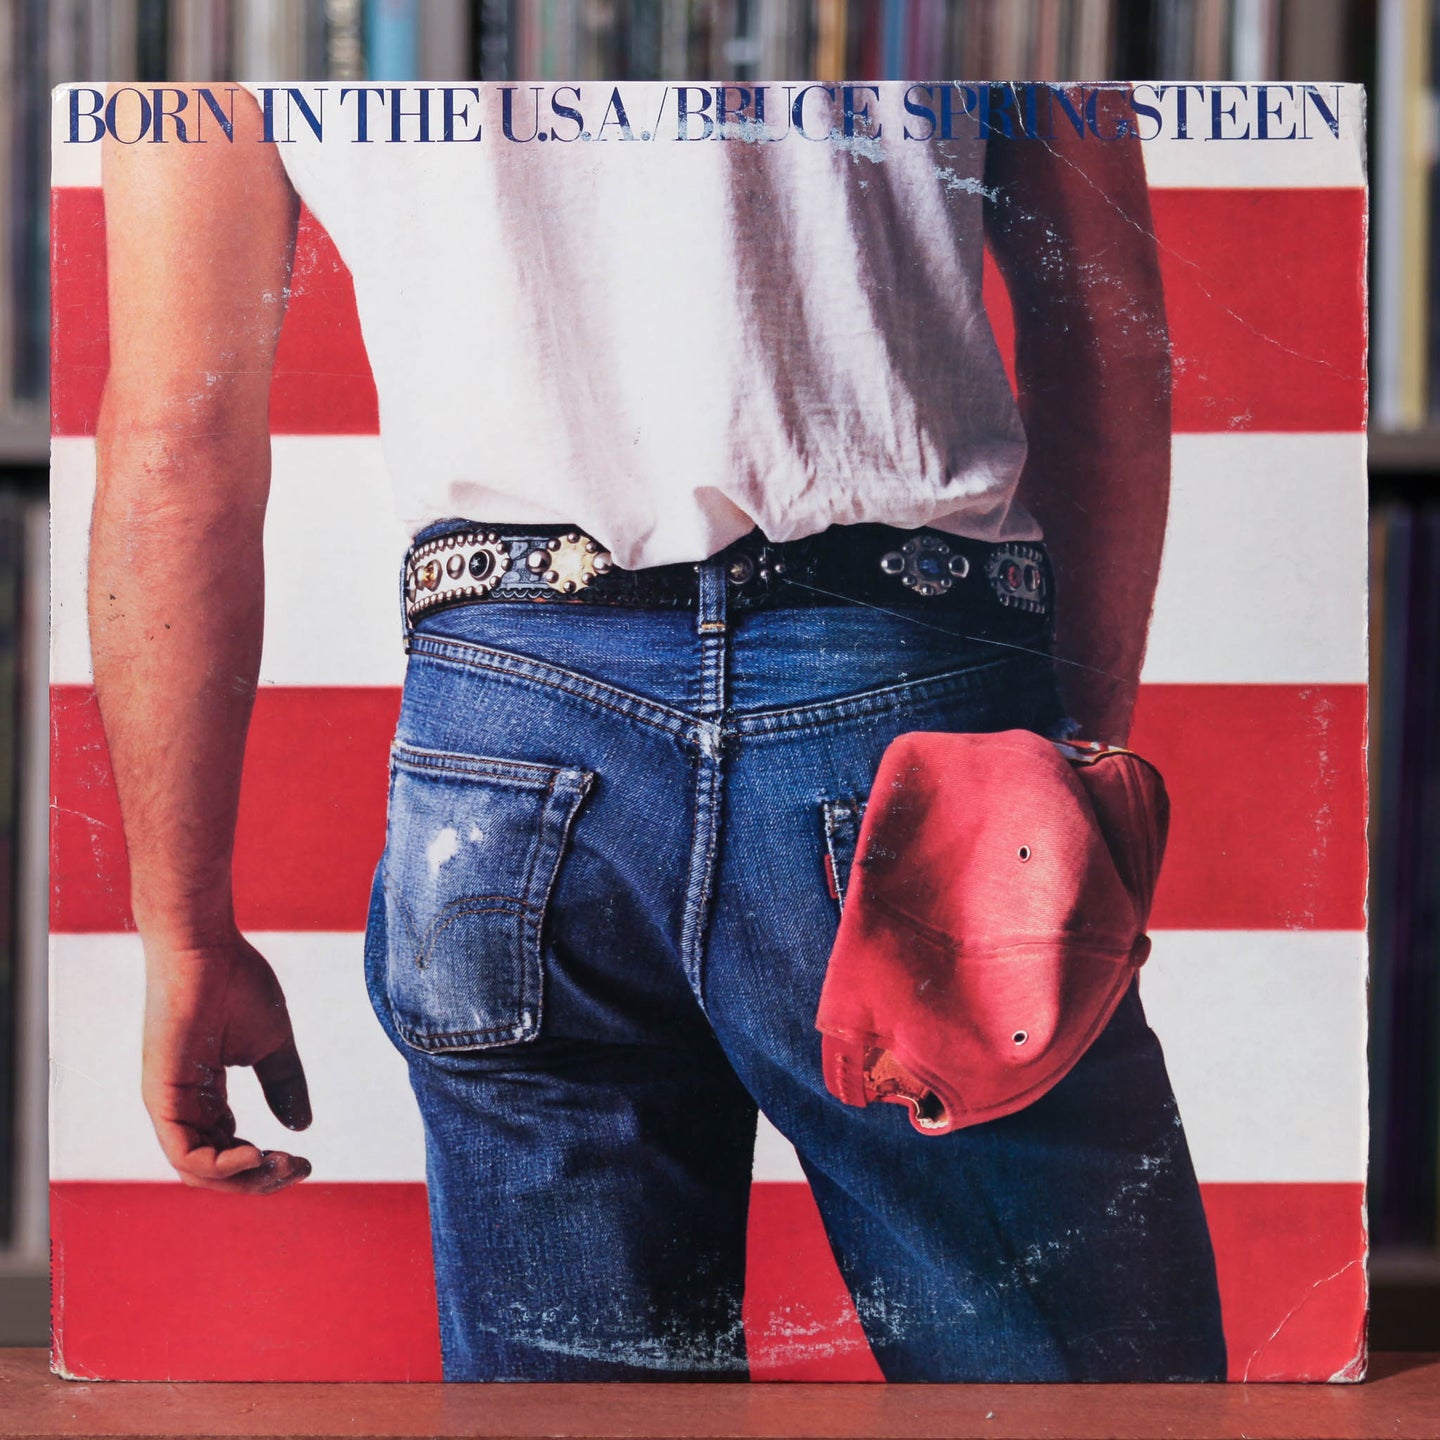 Bruce Springsteen - Born In The U.S.A. - 1984  Columbia, VG/VG